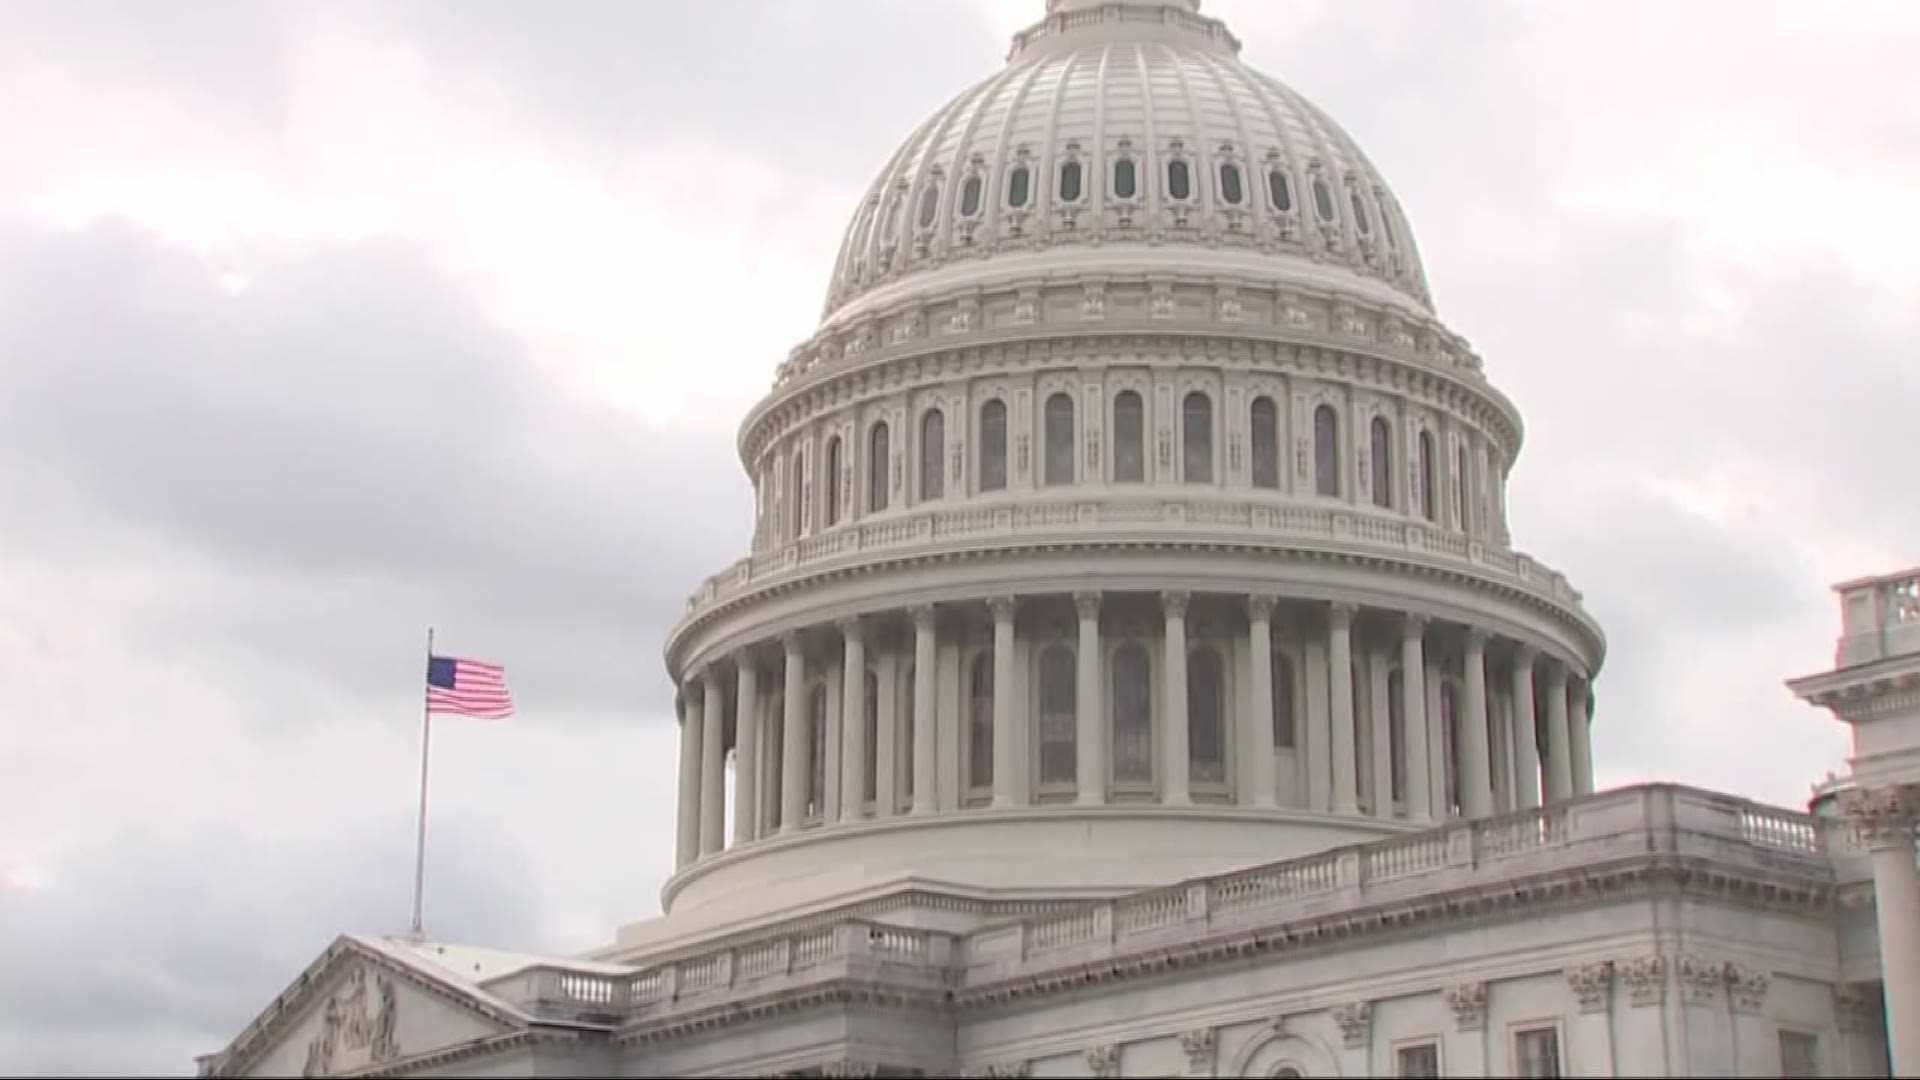 We are taking a look at what you can expect from the State of the Union address.